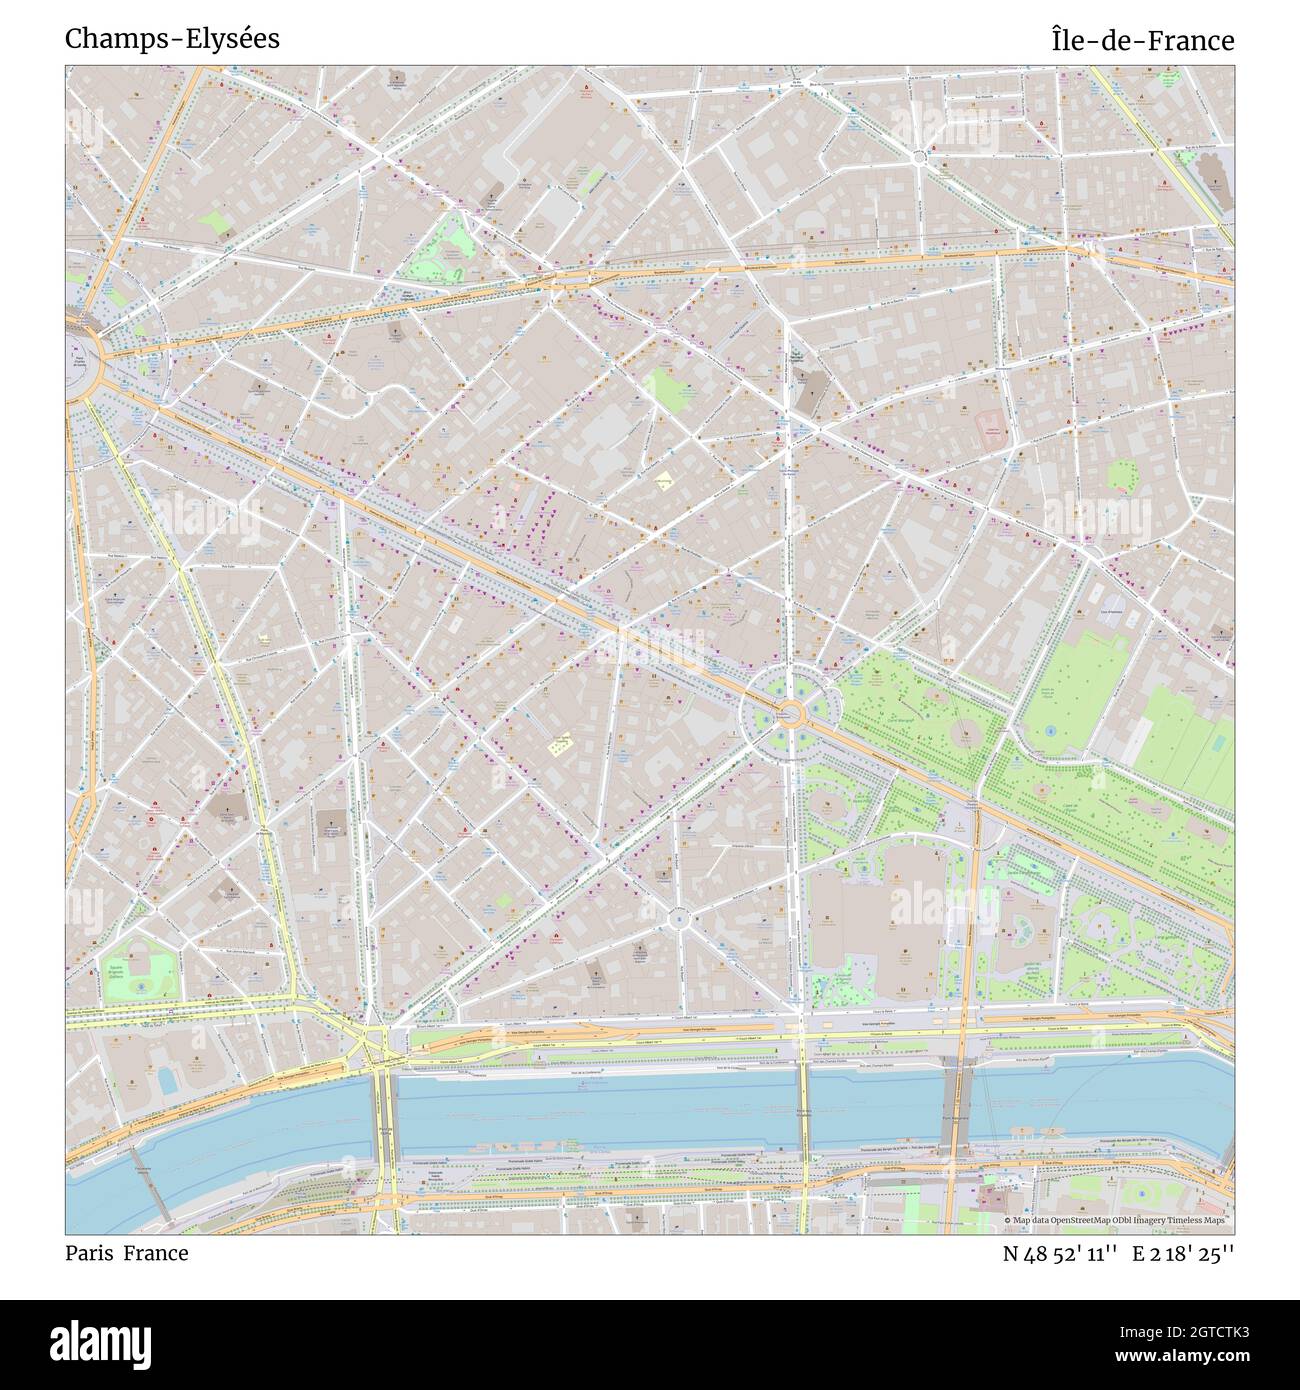 Champs-Elysées, Paris, France, Île-de-France, N 48 52' 11'', E 2 18' 25'', map, Timeless Map published in 2021. Travelers, explorers and adventurers like Florence Nightingale, David Livingstone, Ernest Shackleton, Lewis and Clark and Sherlock Holmes relied on maps to plan travels to the world's most remote corners, Timeless Maps is mapping most locations on the globe, showing the achievement of great dreams Stock Photo